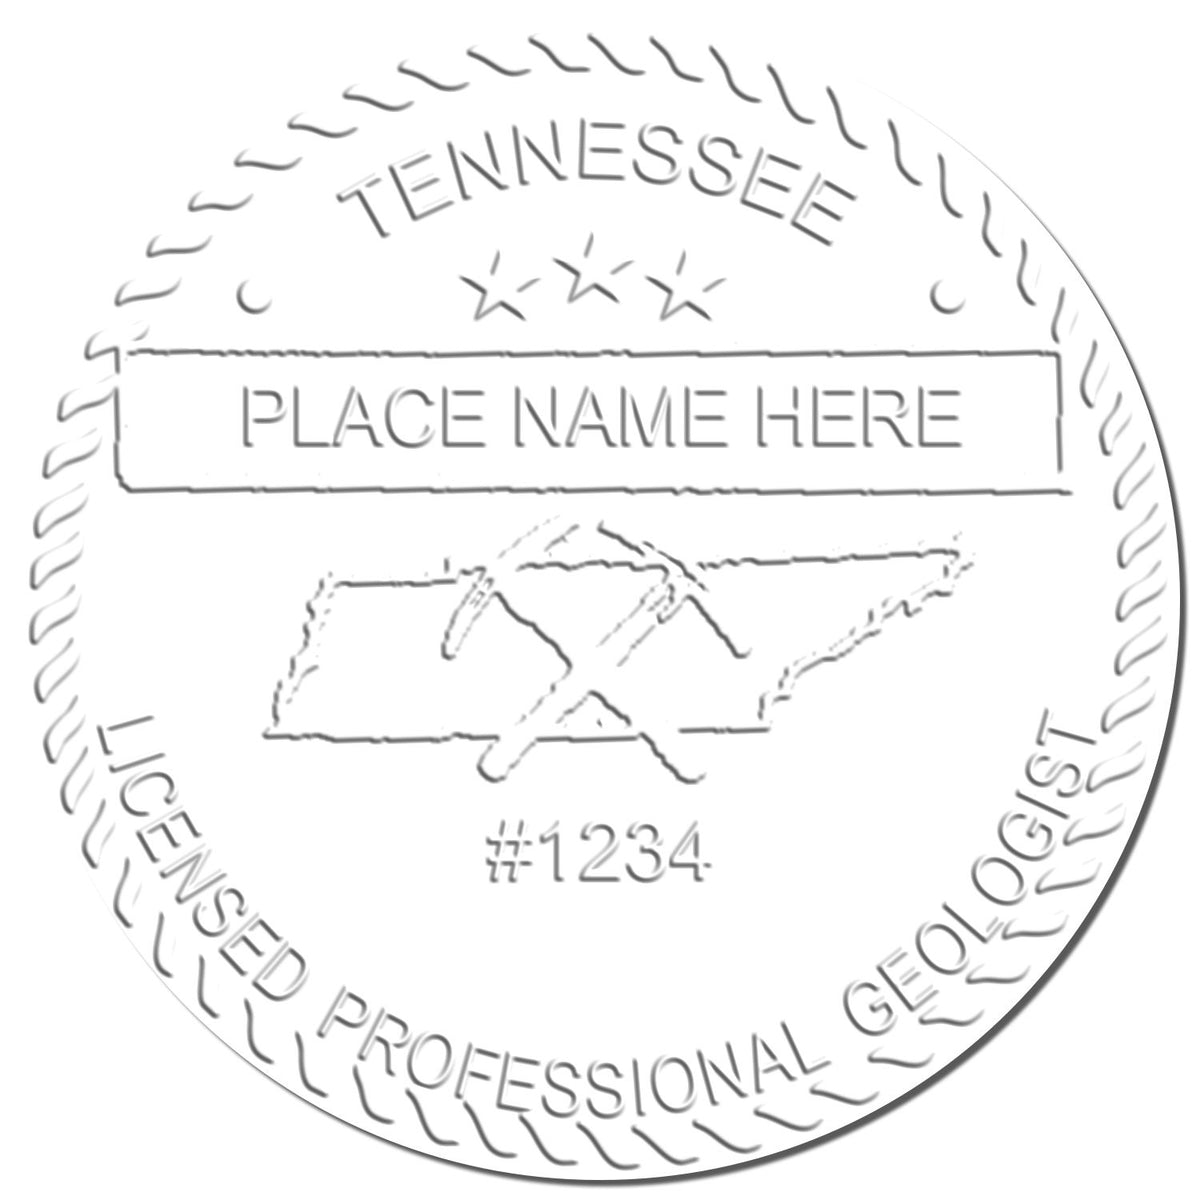 The Tennessee Geologist Desk Seal stamp impression comes to life with a crisp, detailed image stamped on paper - showcasing true professional quality.